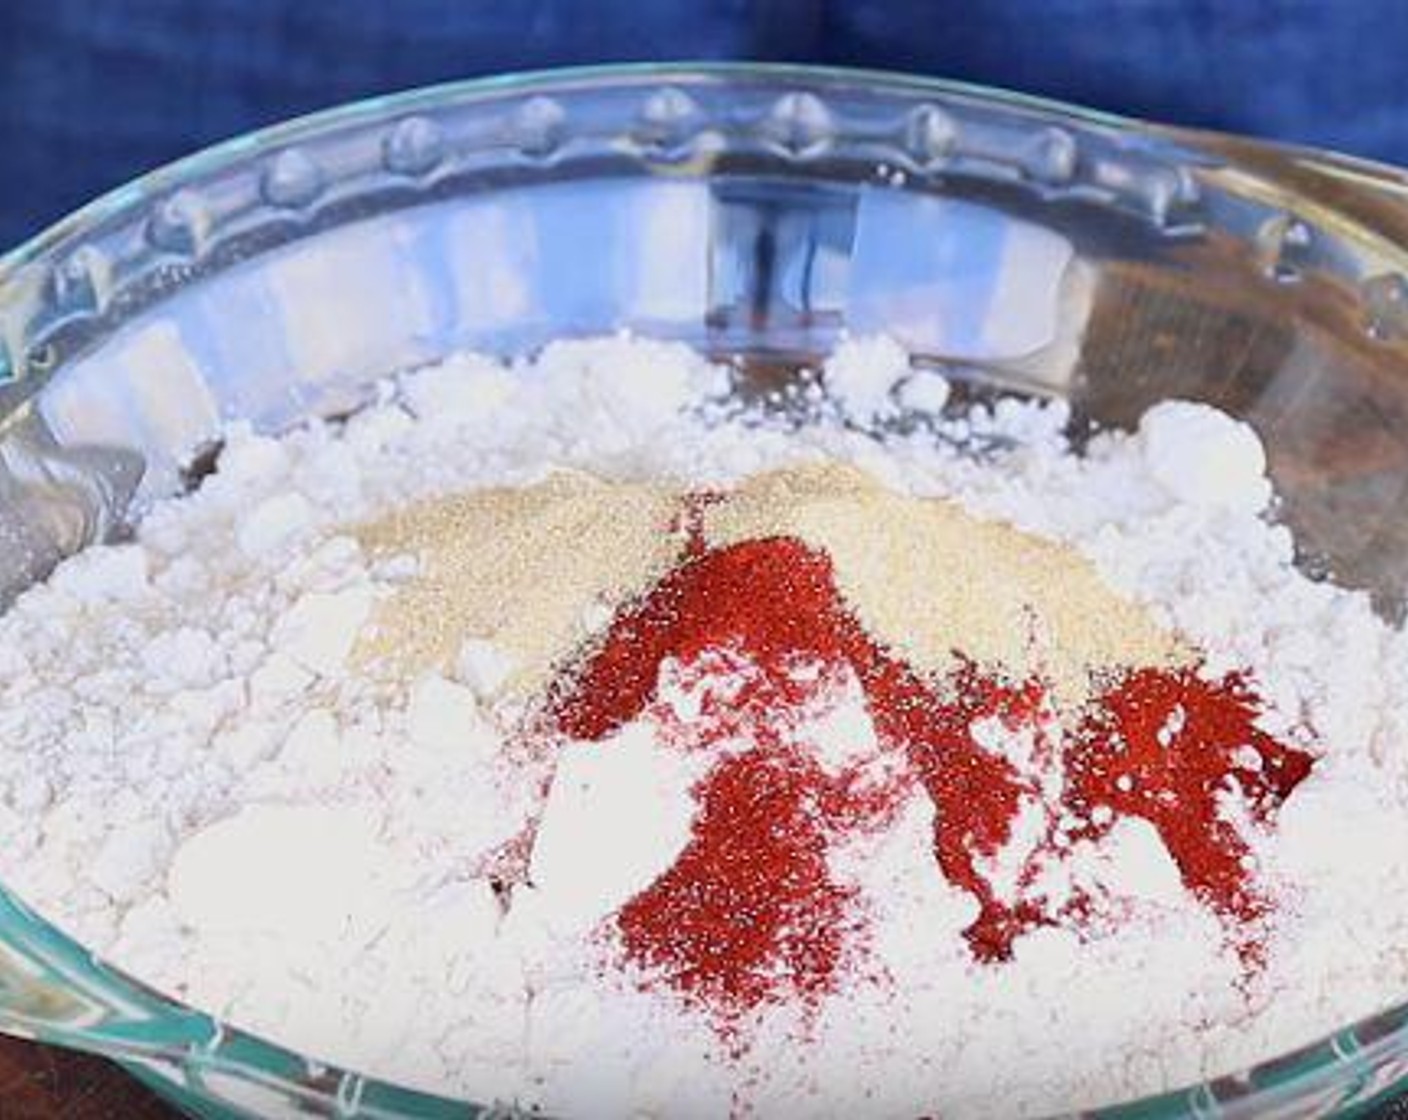 step 2 Make the breading by combining the All-Purpose Flour (1 1/2 cups), Cayenne Pepper (1/8 tsp), Salt (1/2 Tbsp), Ground Black Pepper (to taste), McCormick® Garlic Powder (1 tsp), Paprika (1 tsp) and Onion Powder (1 tsp) in a large bowl. Whisk until well combined.